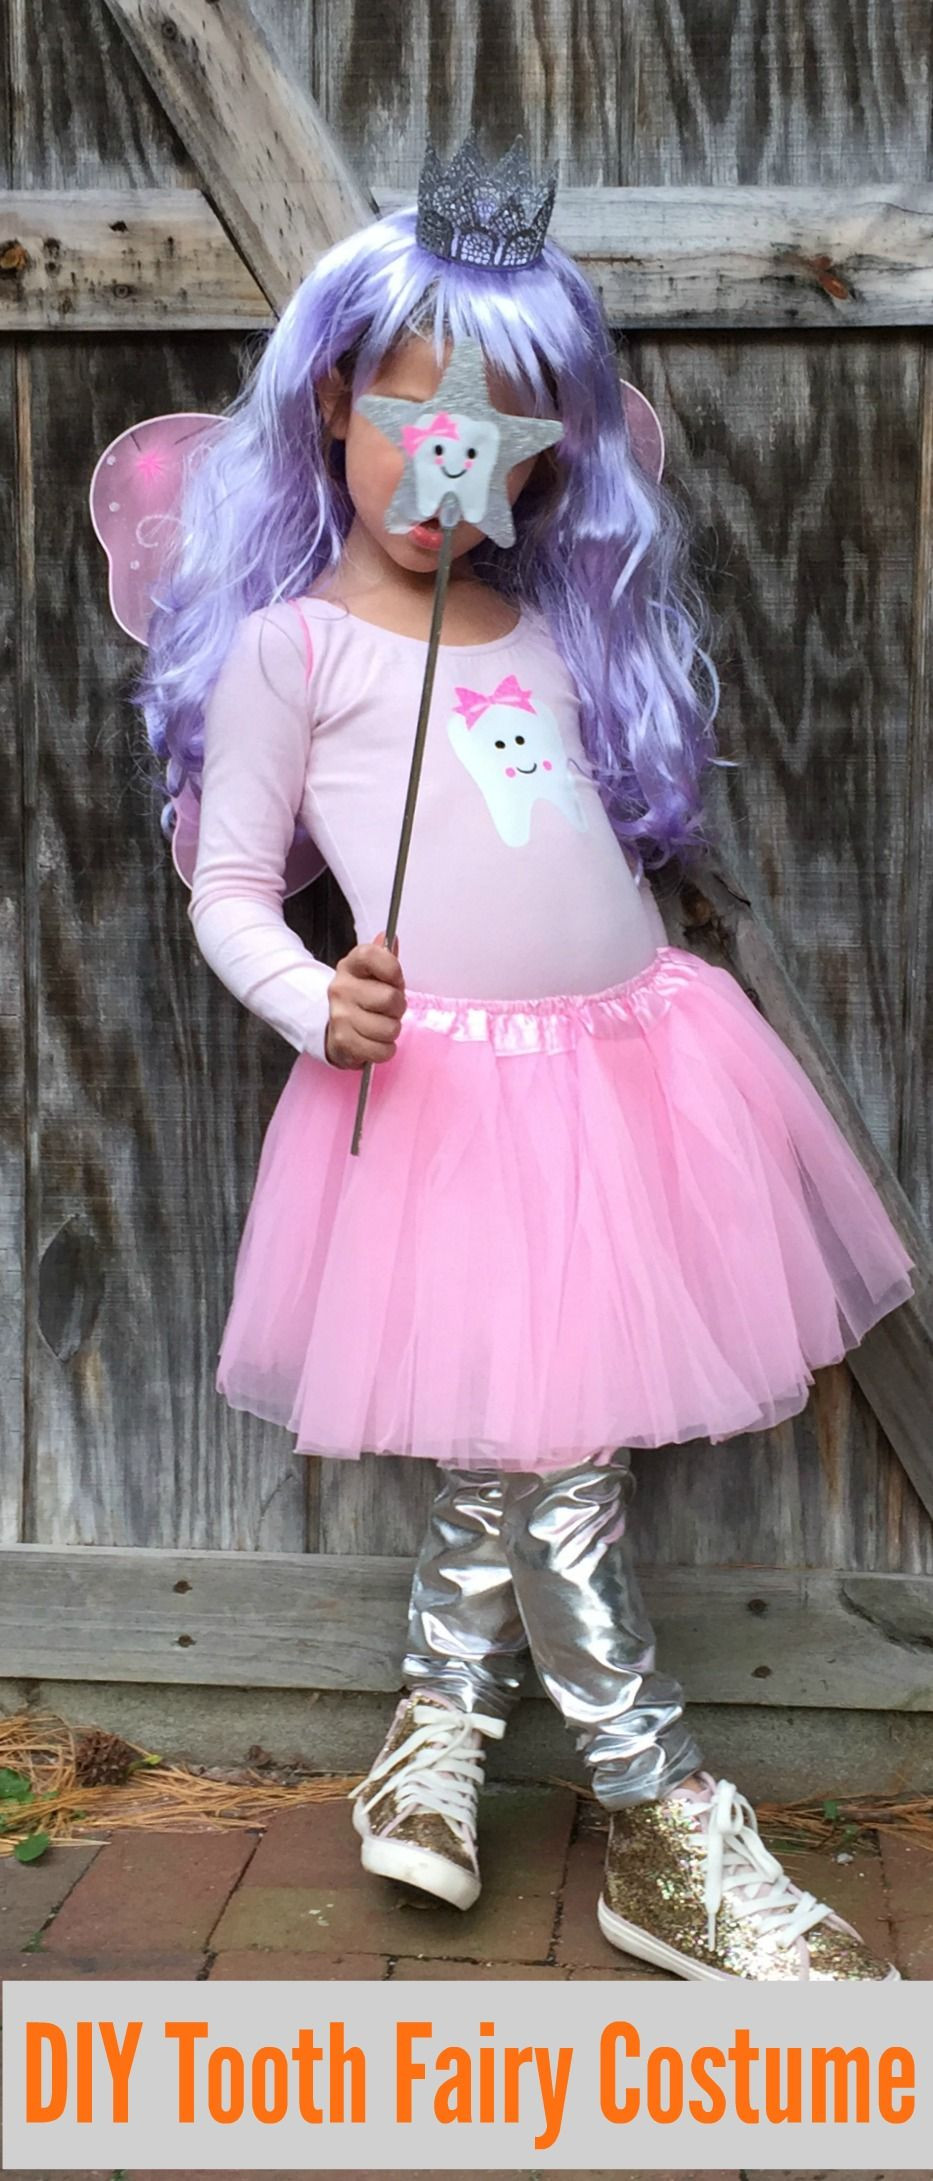 DIY Tooth Fairy Costumes
 Easy DIY Halloween Costume for Kids The Tooth Fairy